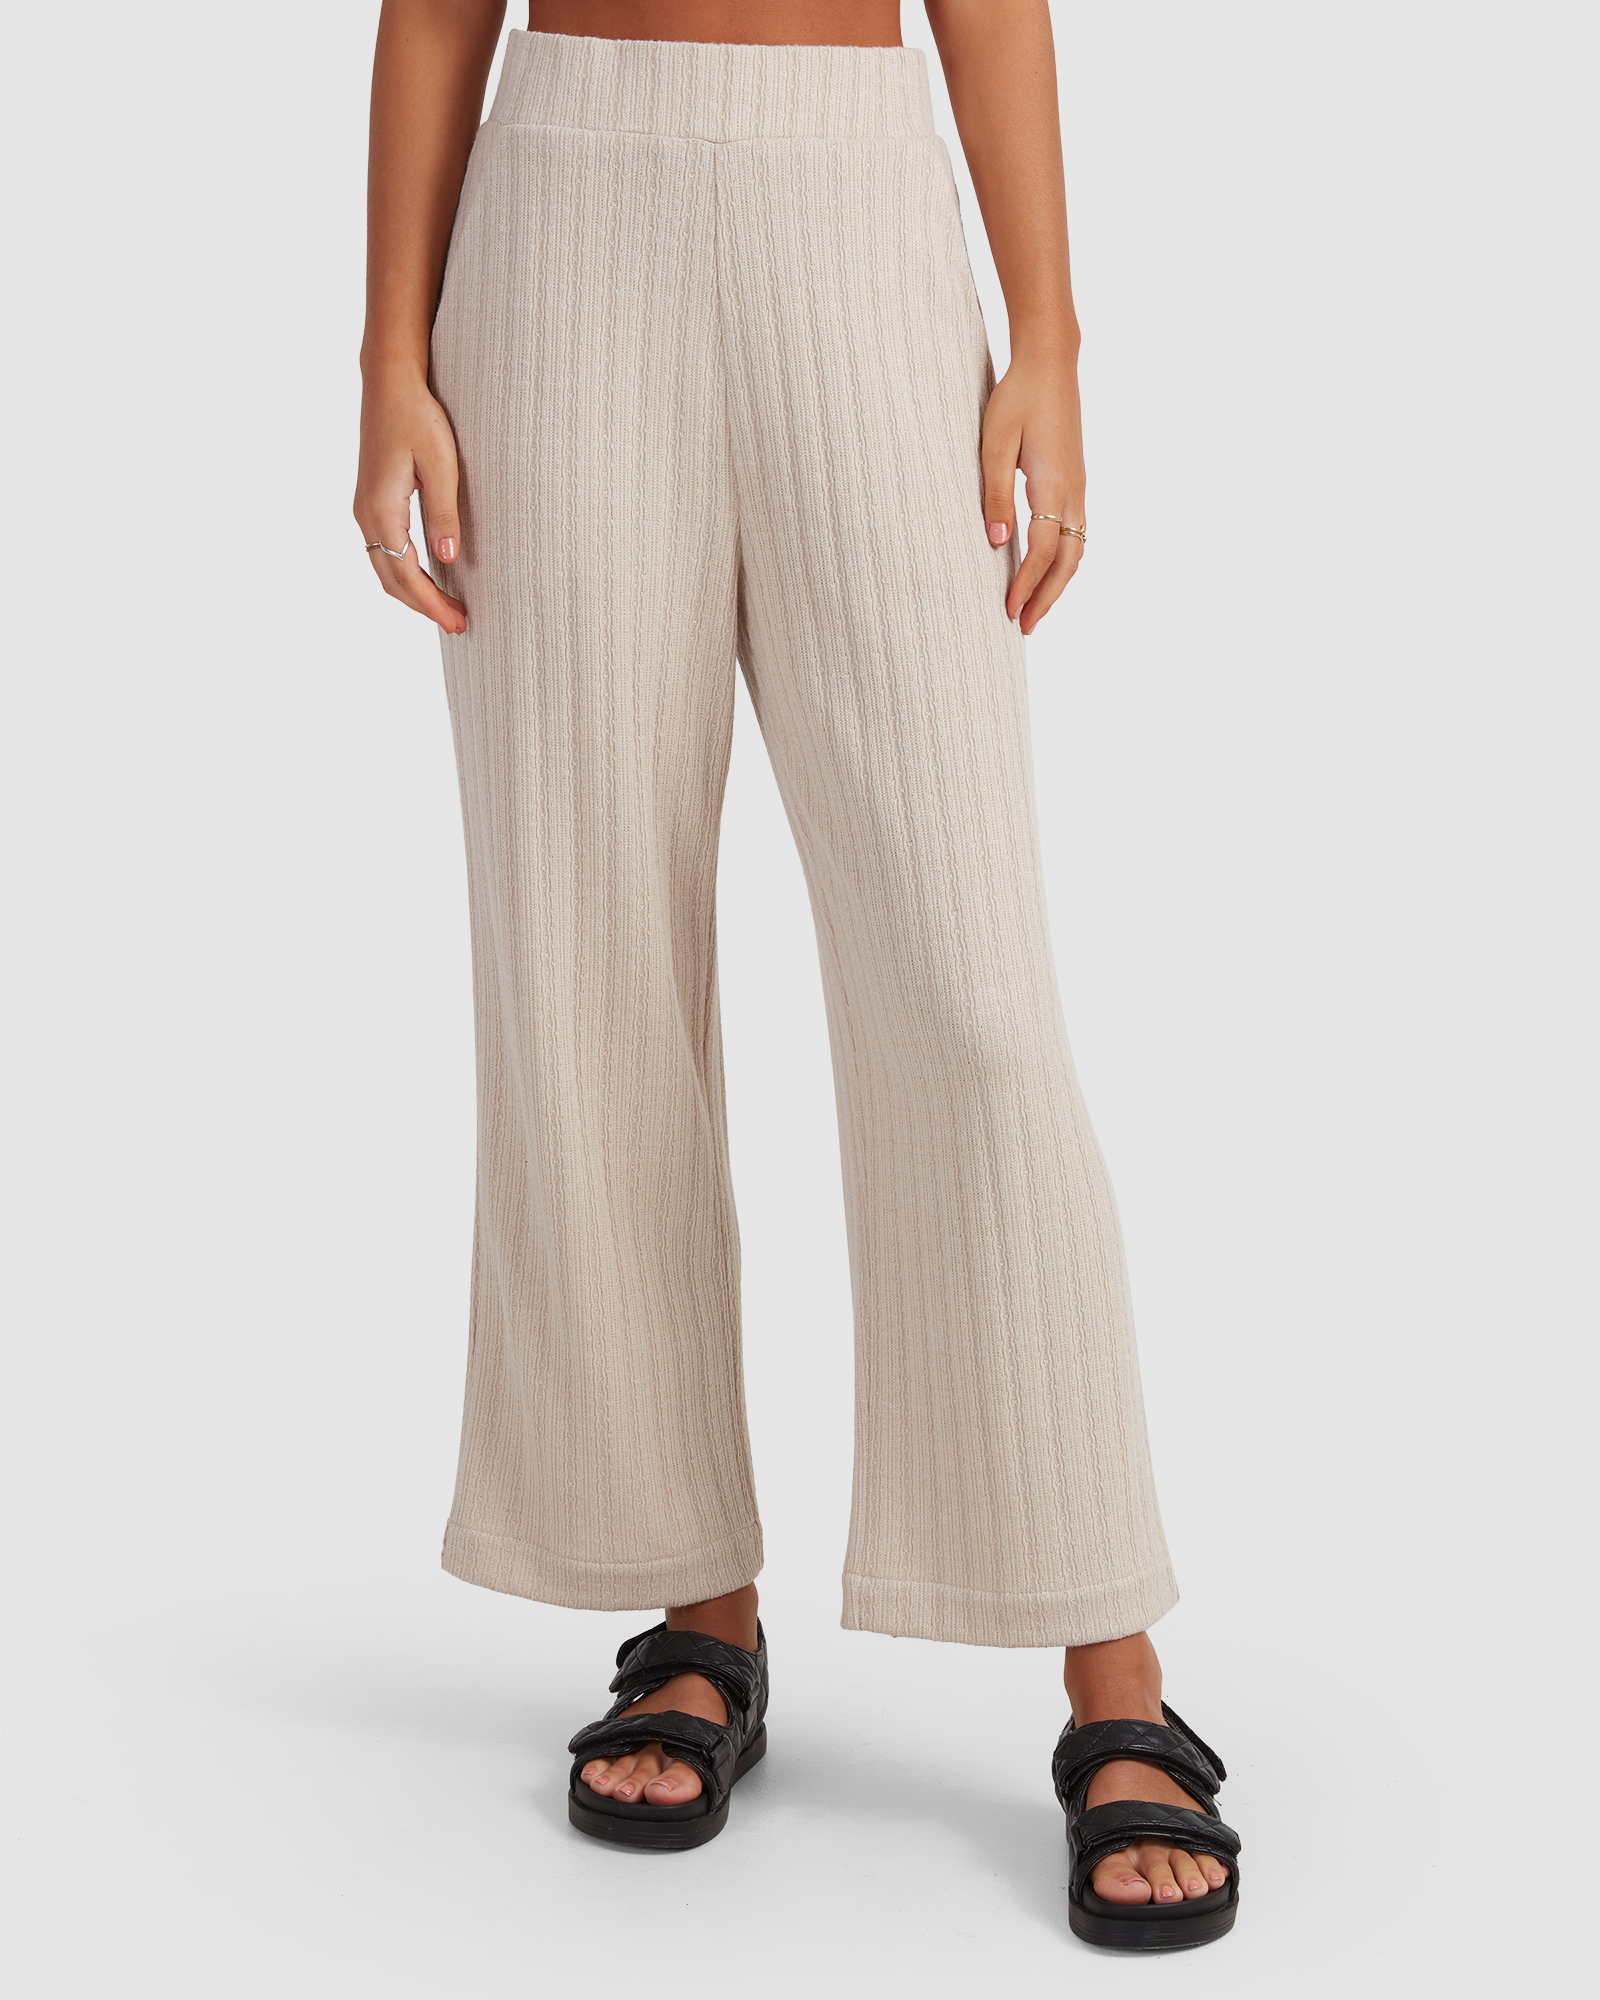 Oatmeal PULL ON KNIT PANT | Amazon Surf